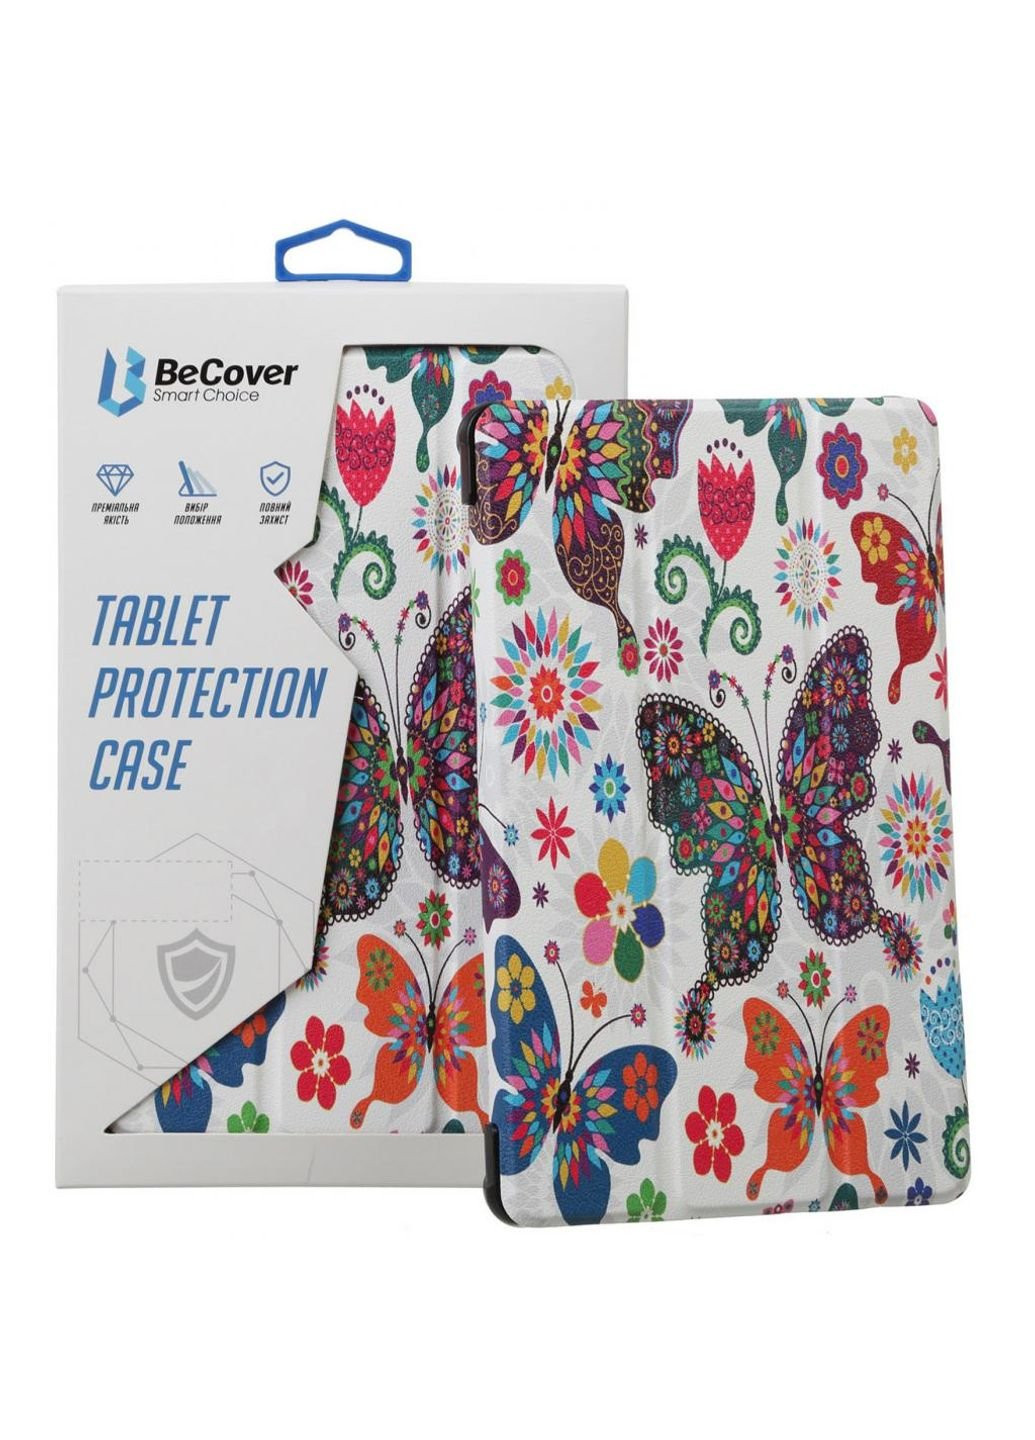 Чехол для планшета Smart Case Huawei MatePad T10s Butterfly (705937) BeCover (250198726)